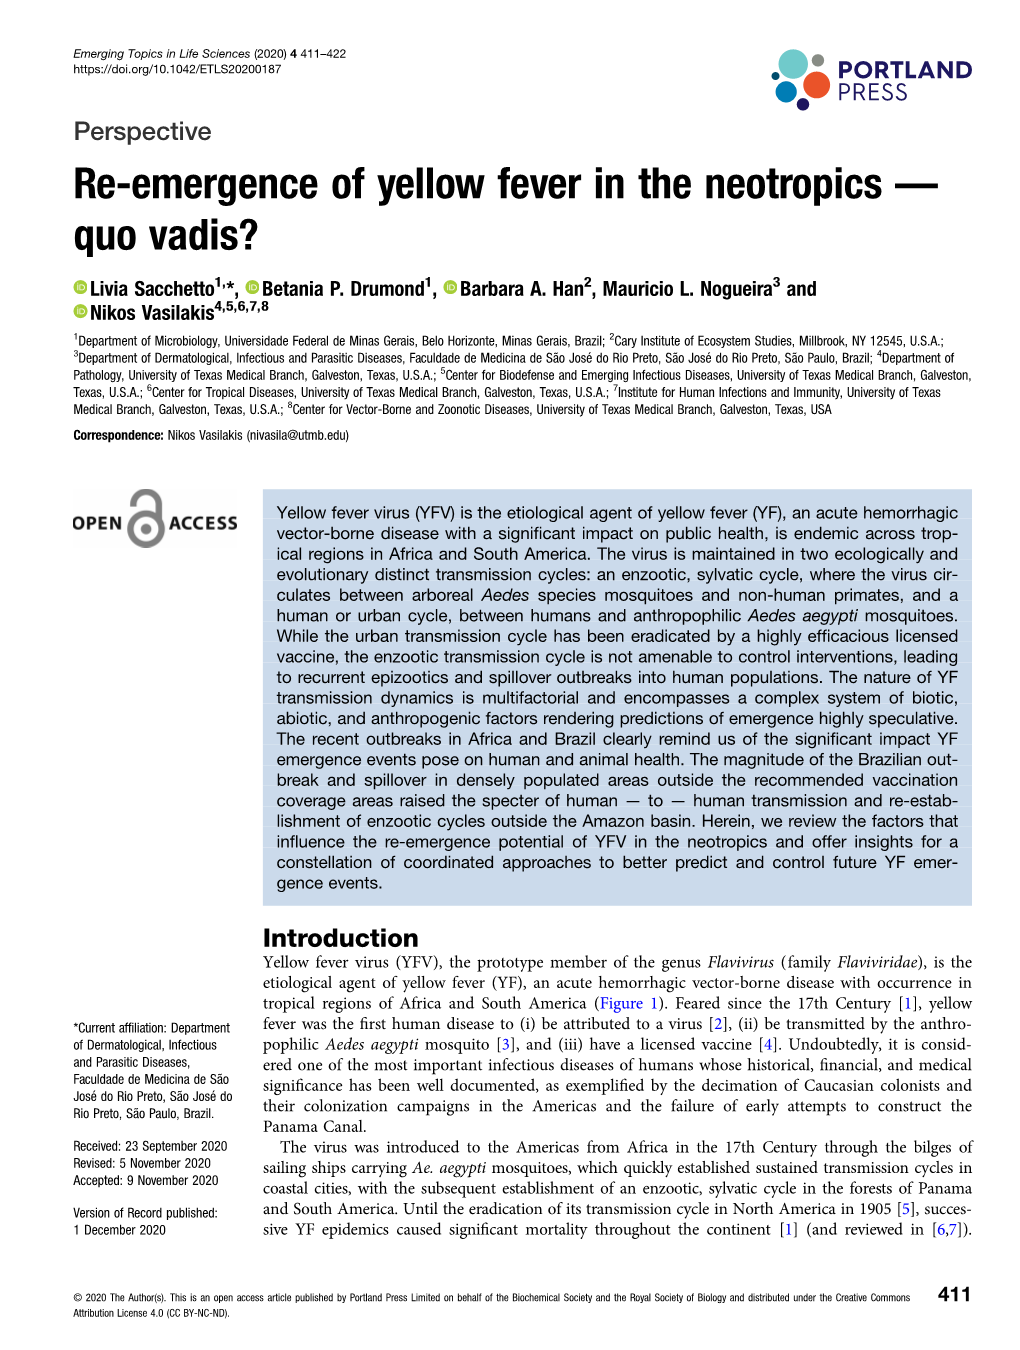 Re-Emergence of Yellow Fever in the Neotropics — Quo Vadis?